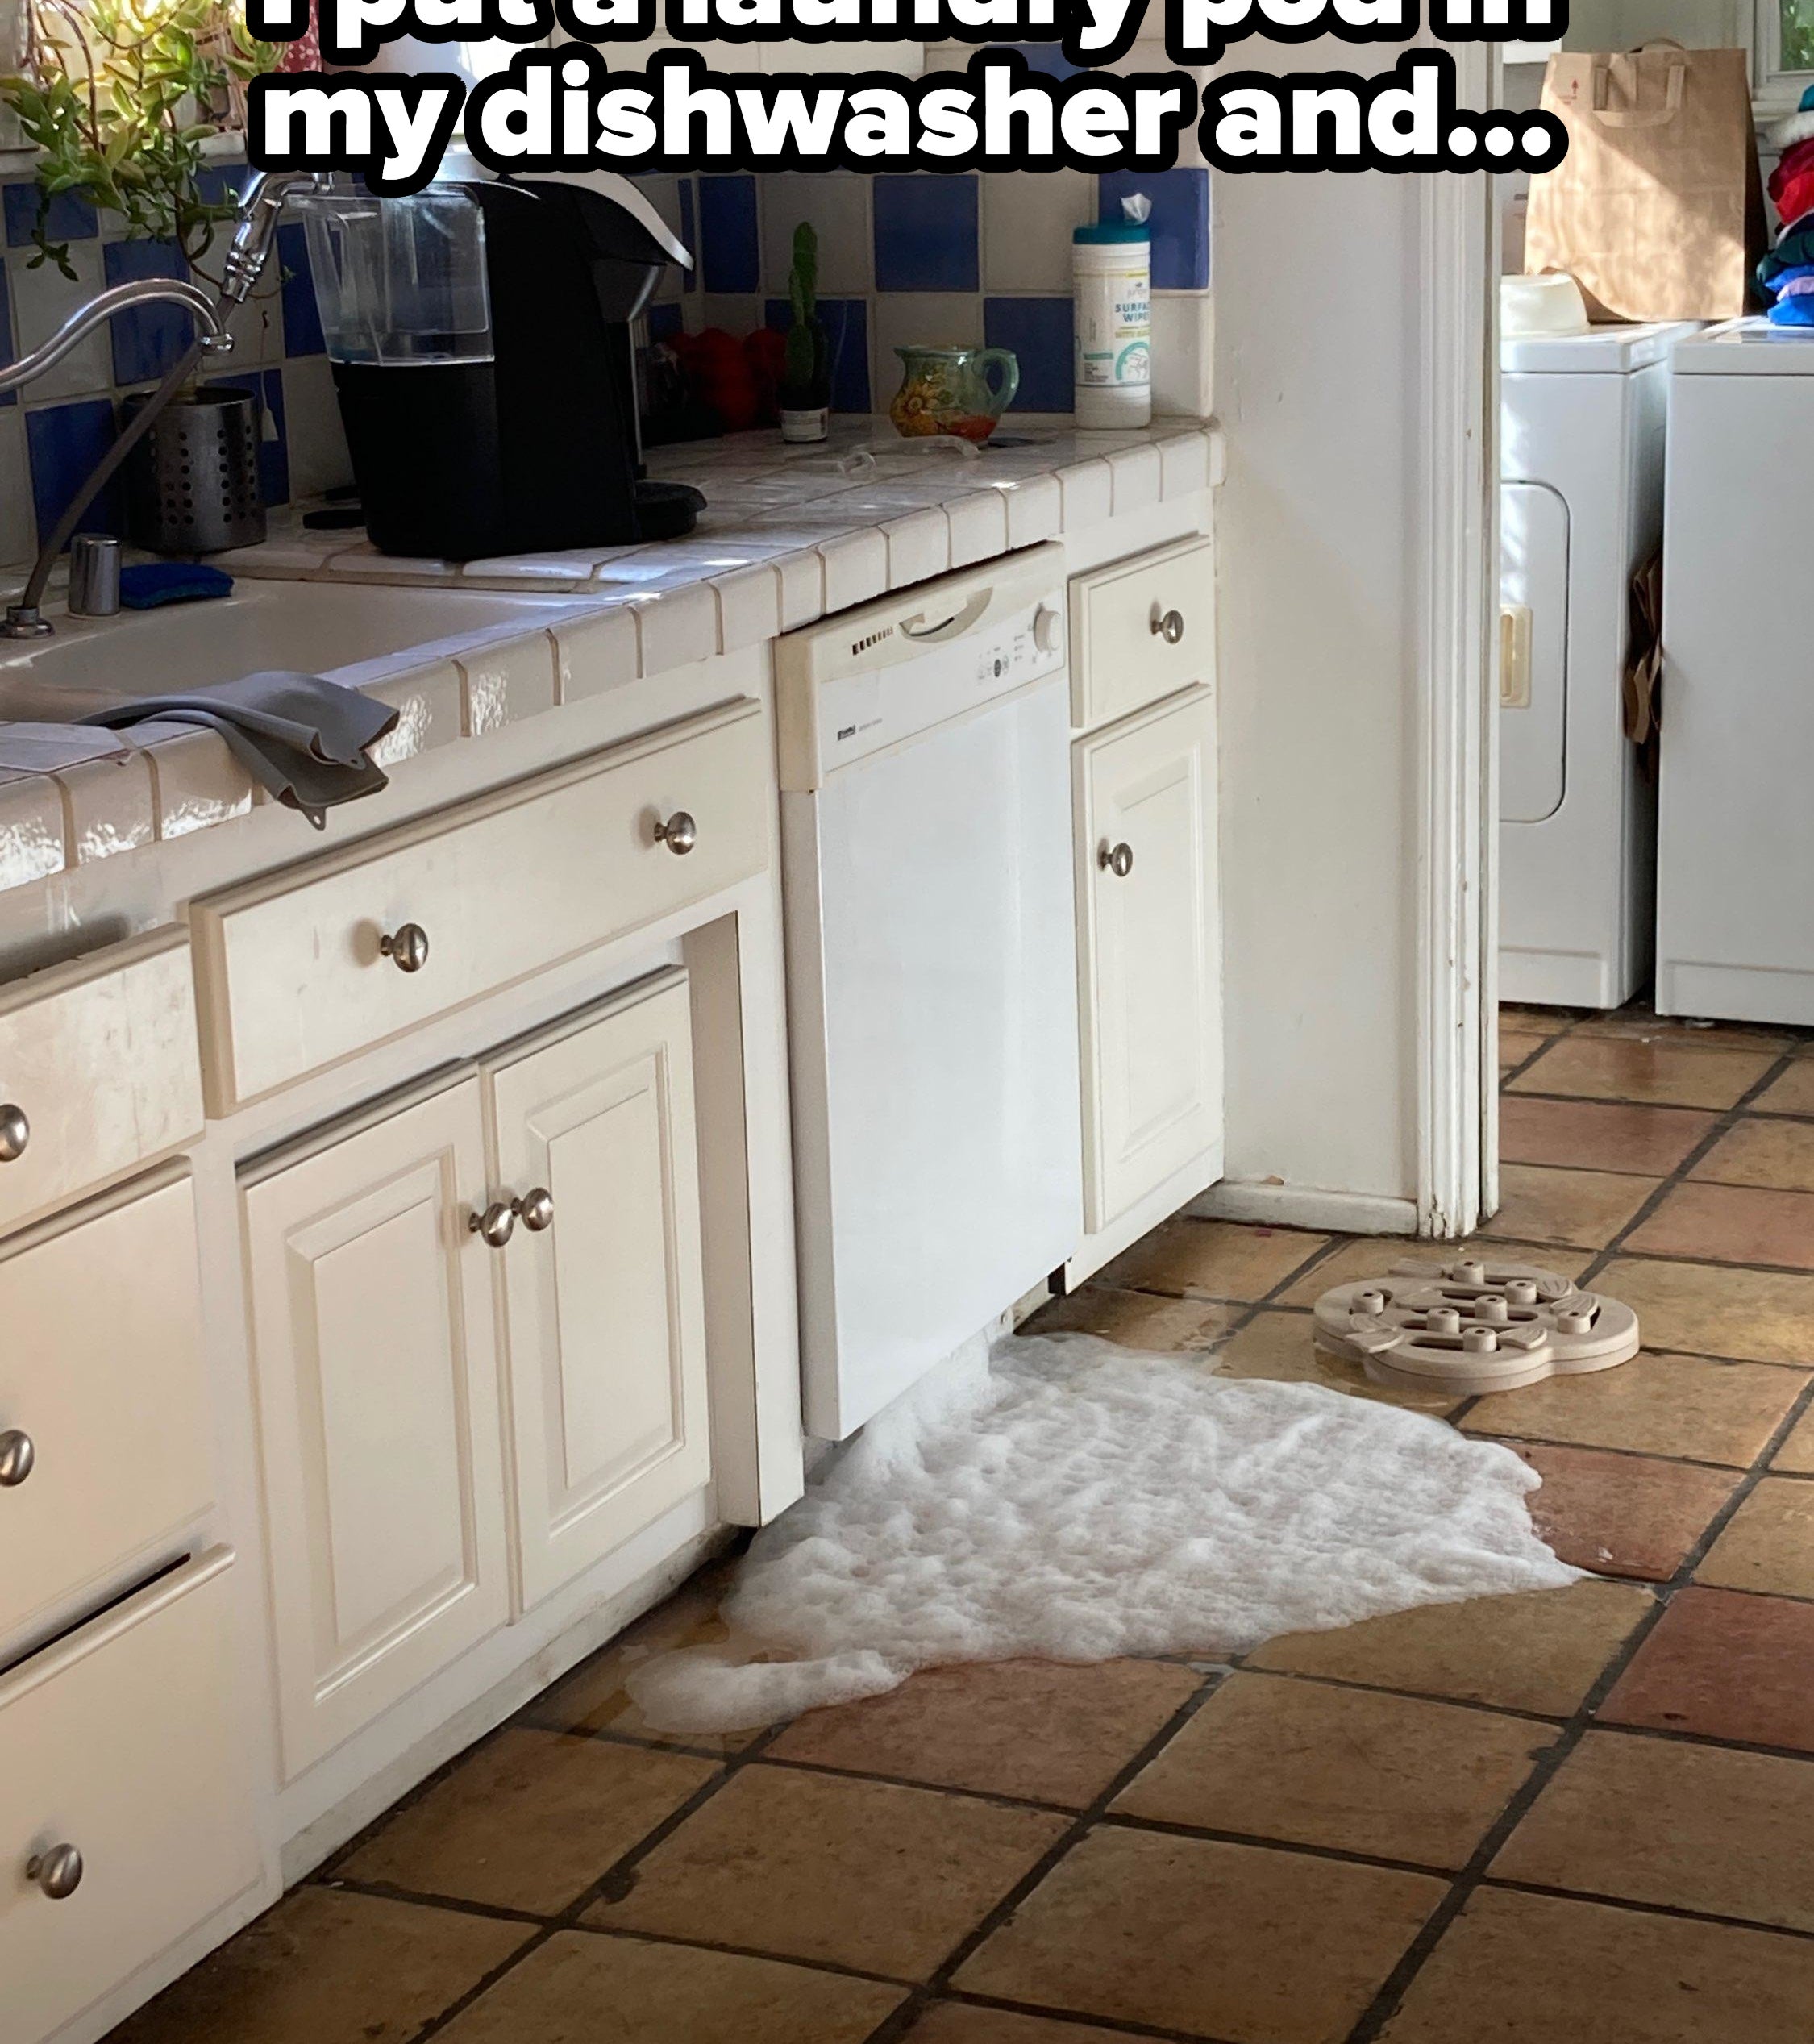 Dish soap leaking from a dishwasher